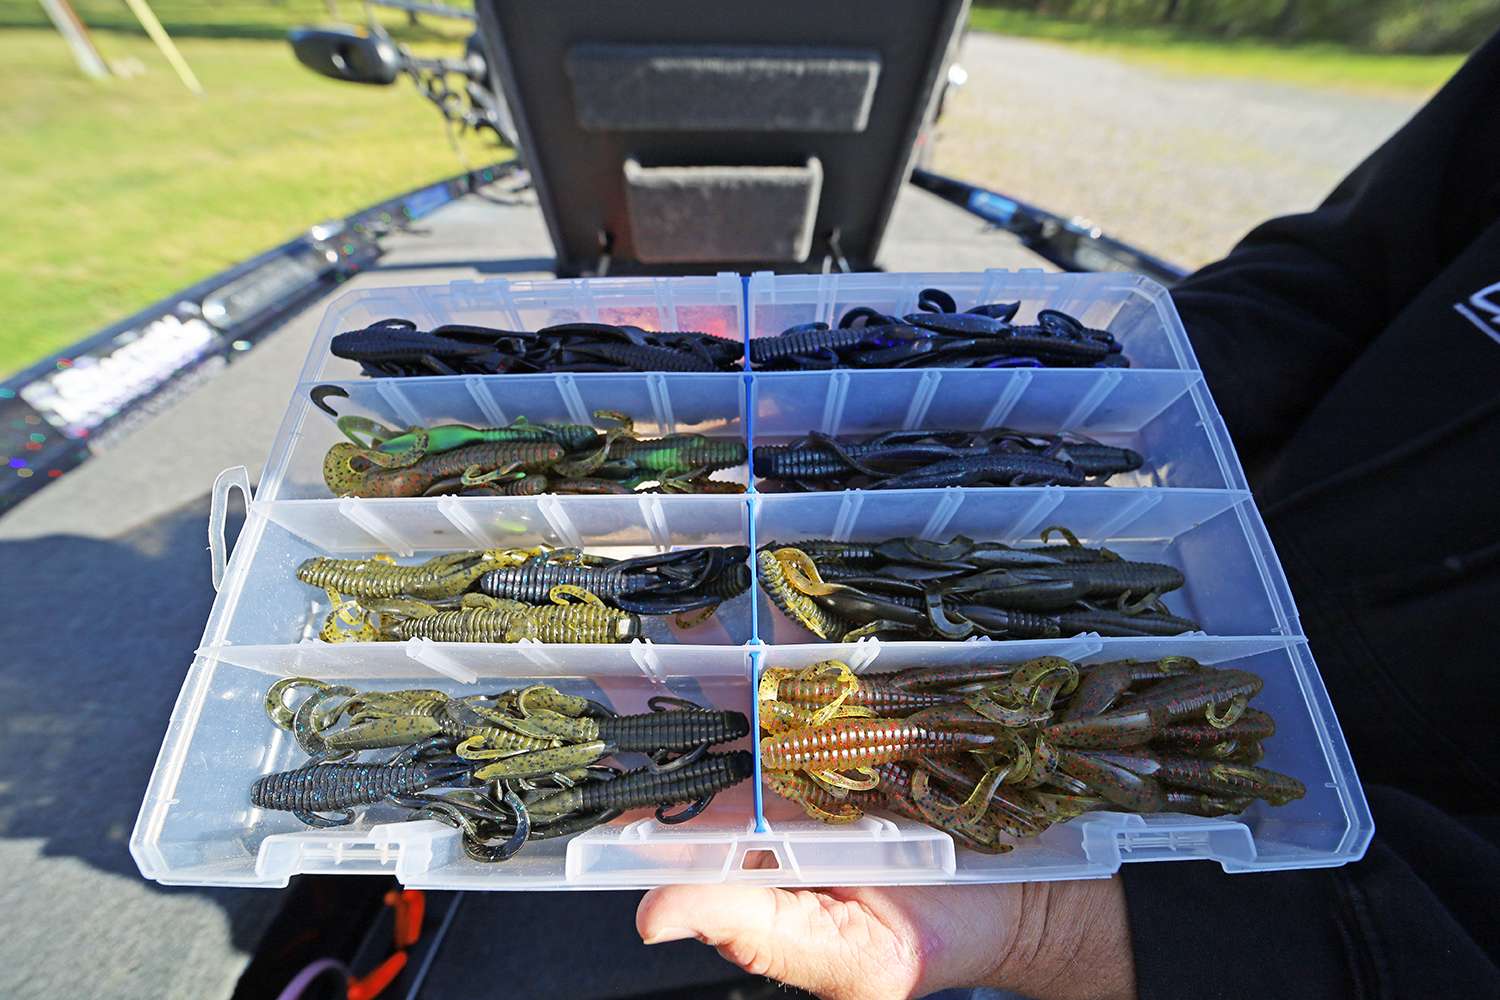 More Reaction Innovations baits. 